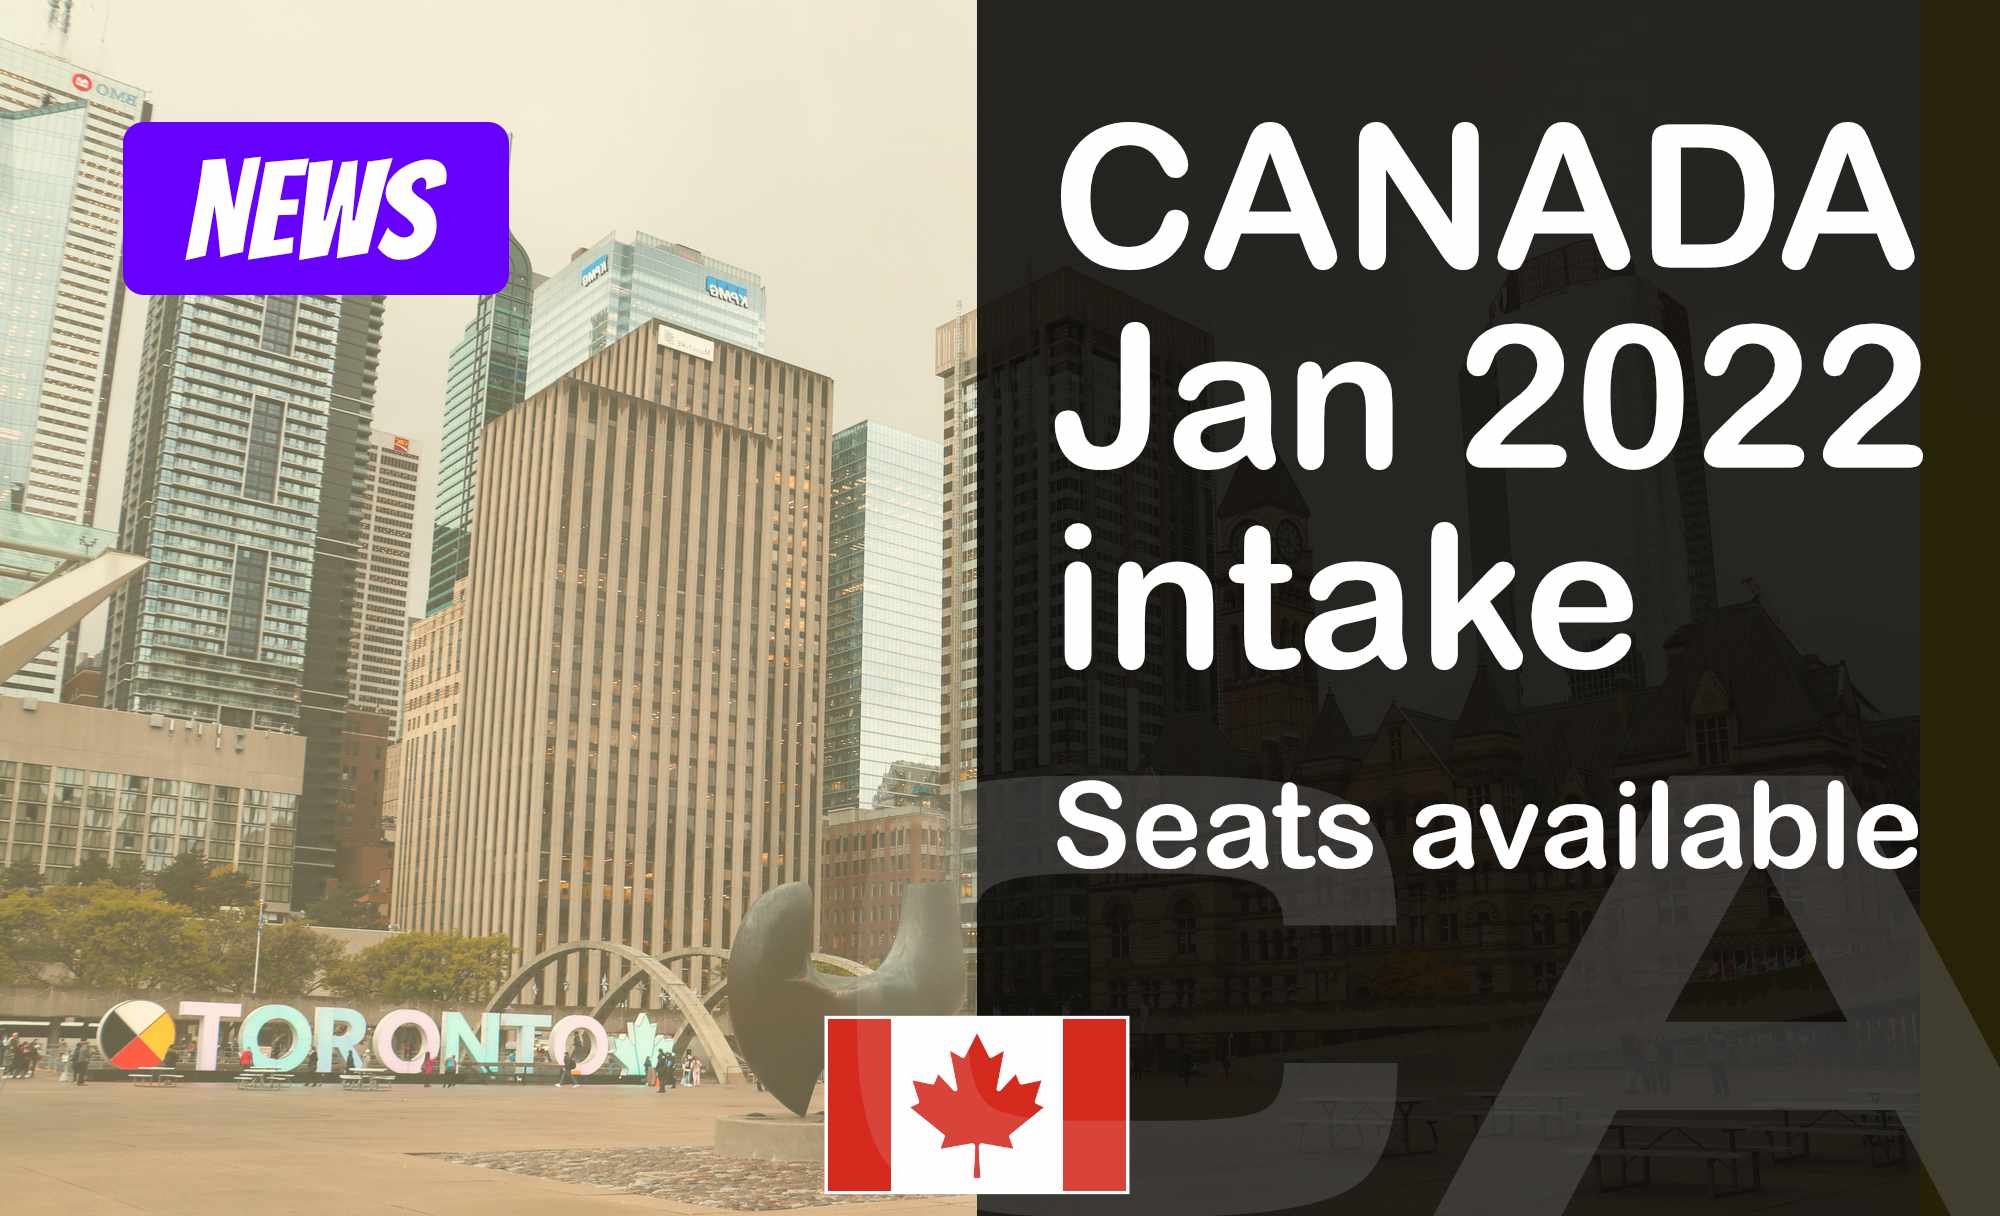 Canada: Seats available for January 2022 intake